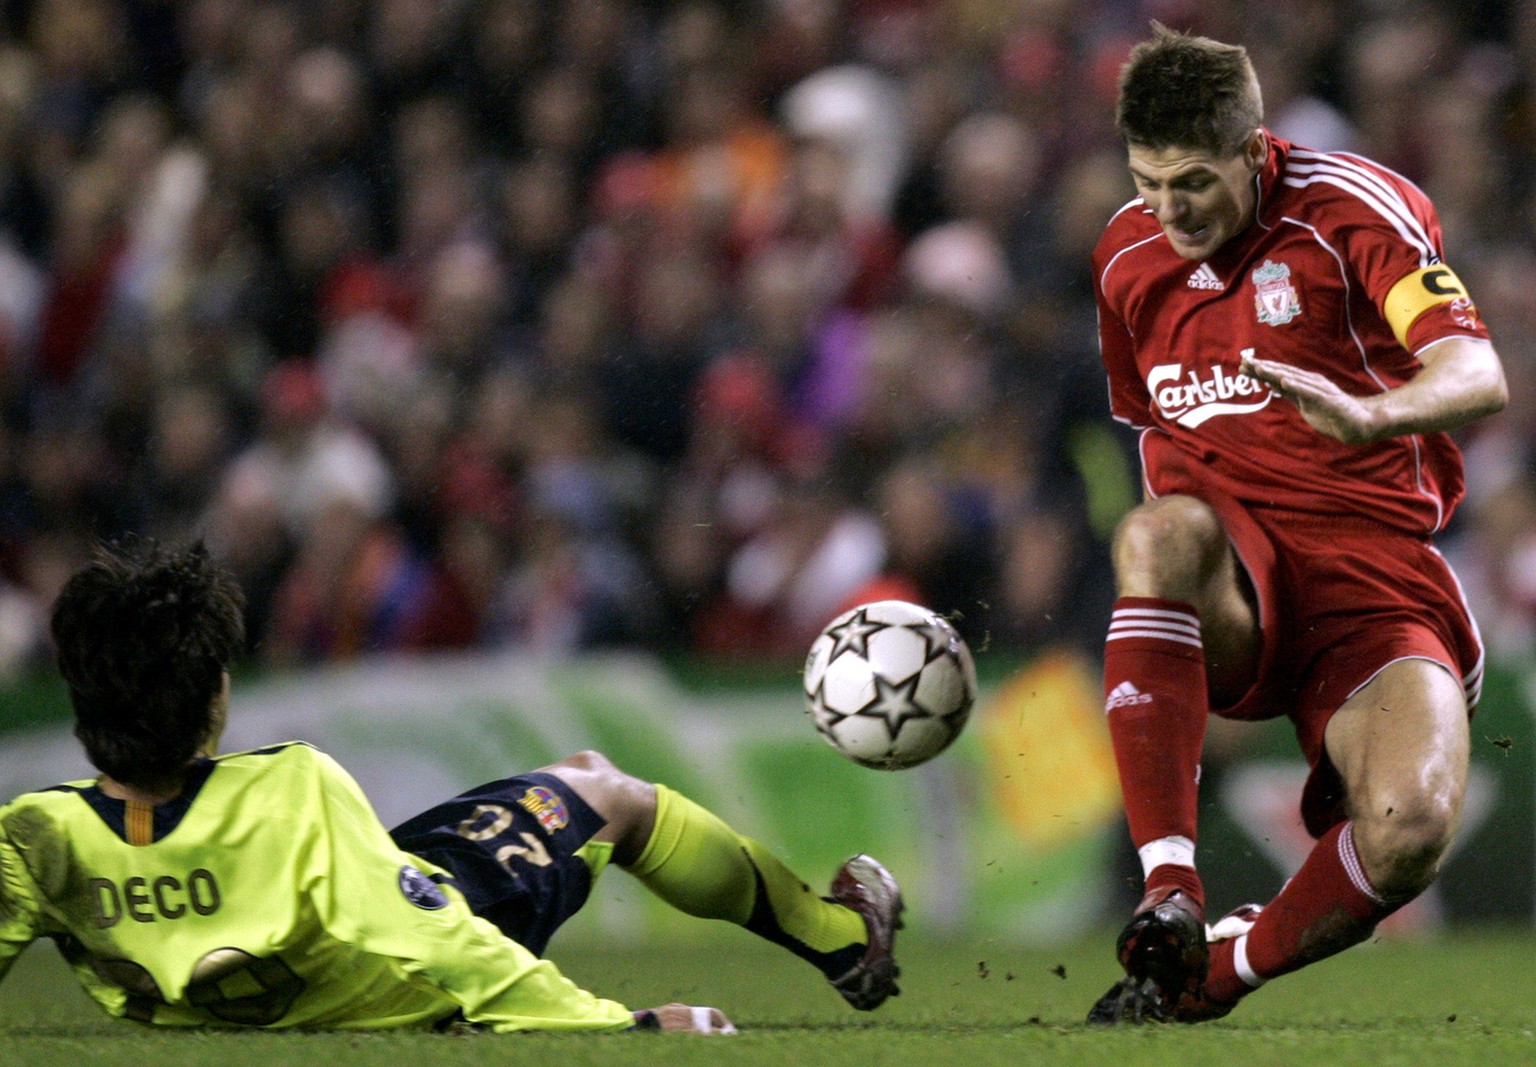 Liverpool's Steven Gerrard, right, is tackled by Barcelona's Deco during their Champion's League first knockout round, second leg soccer match, in Liverpool, England, Tuesday March 6, 2007. (AP Photo/ ...